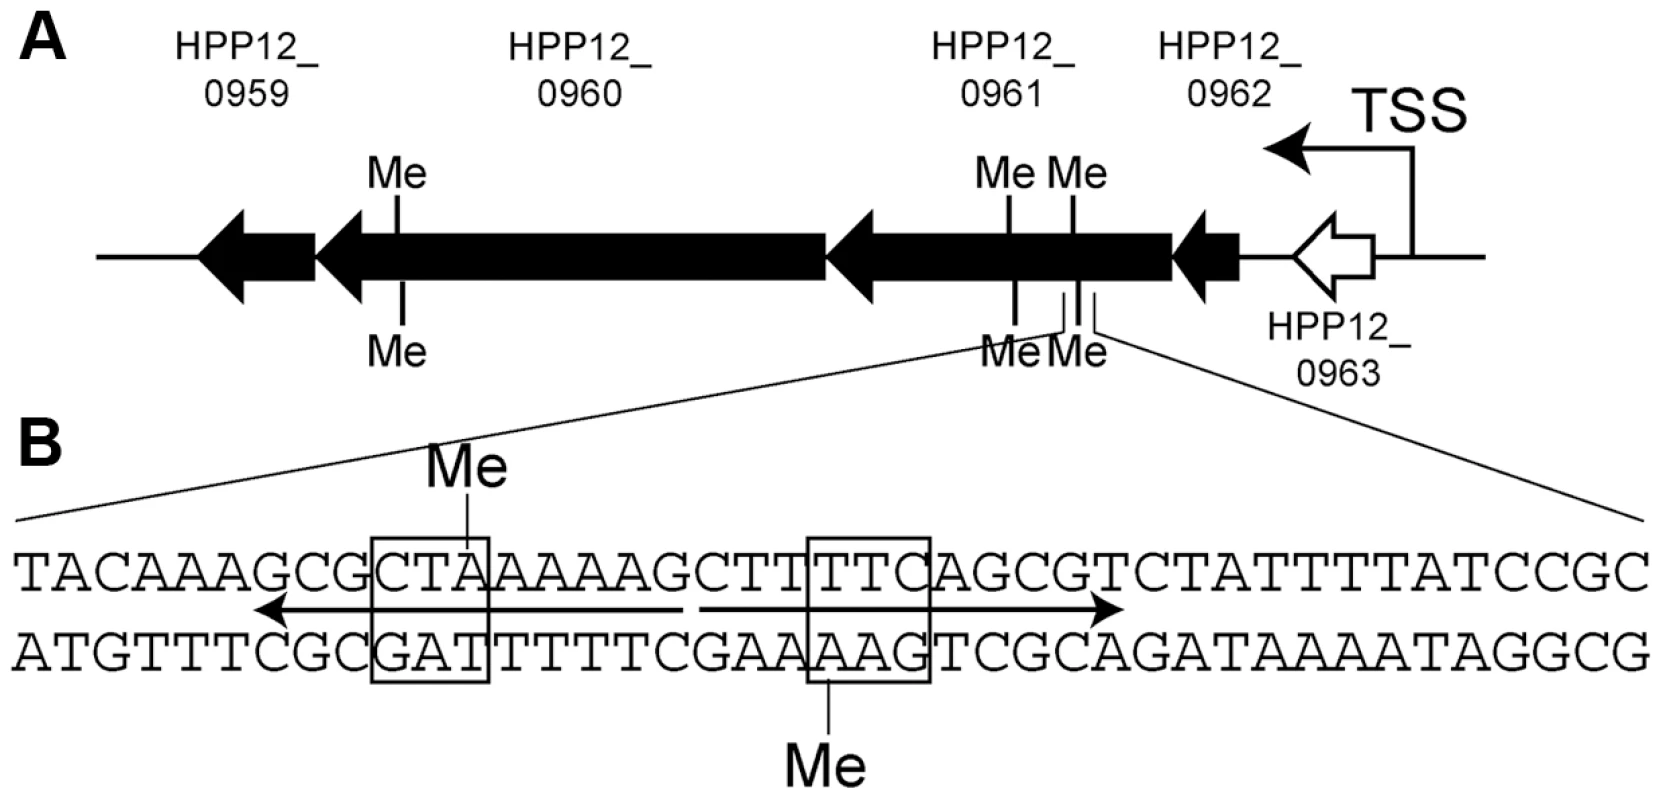 Gene cluster with transcripts decreased by specific Type I methylation.